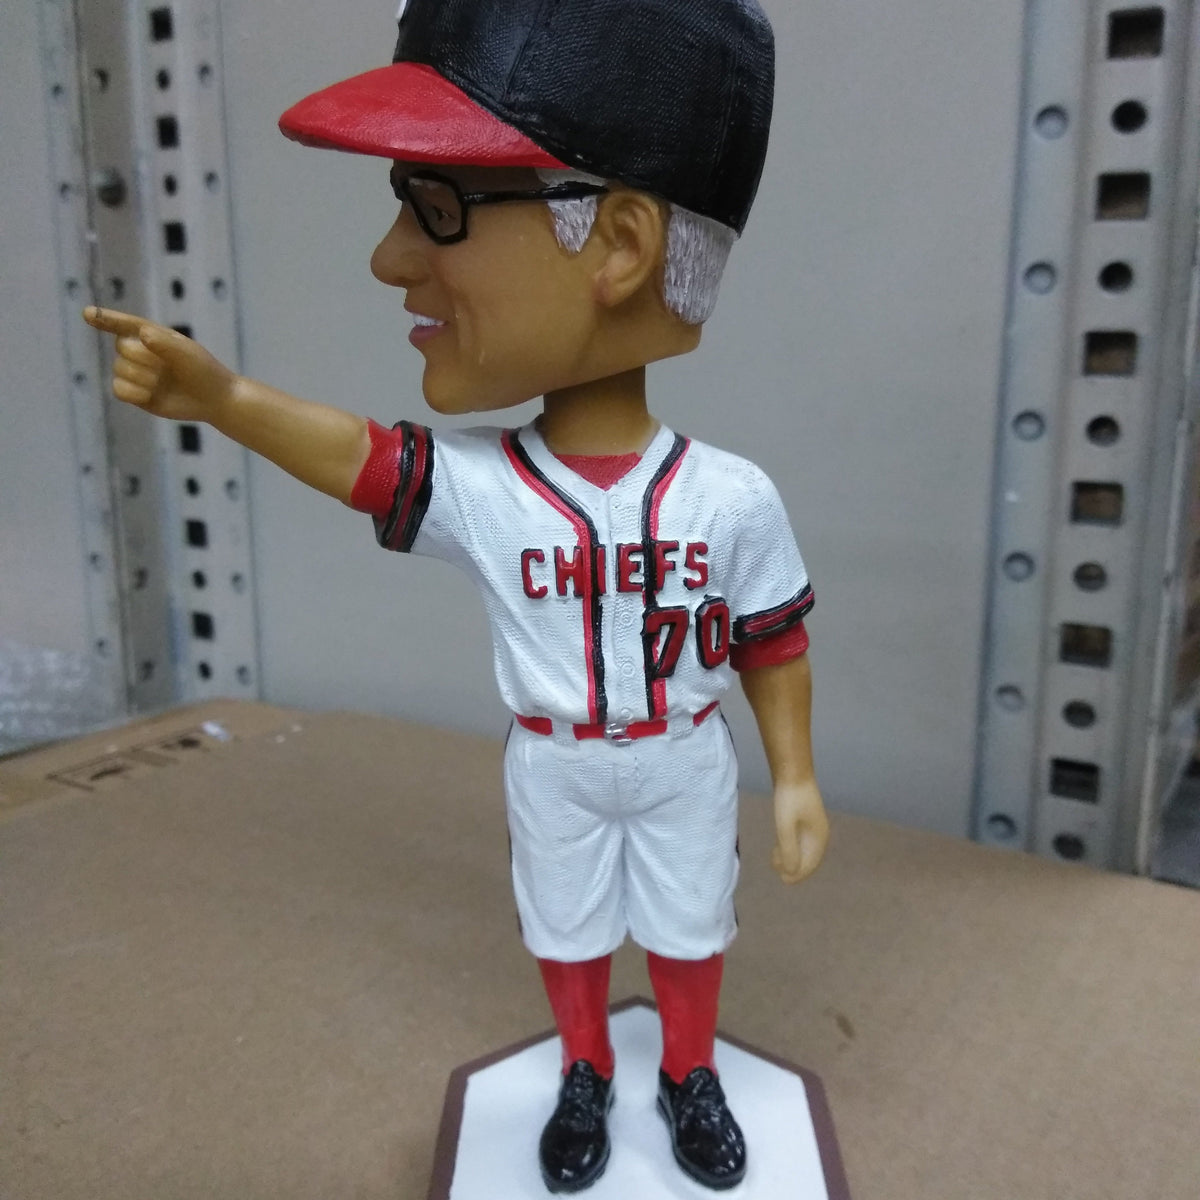 Bobblehead of Cubs manager Joe Maddon unveiled in limited edition